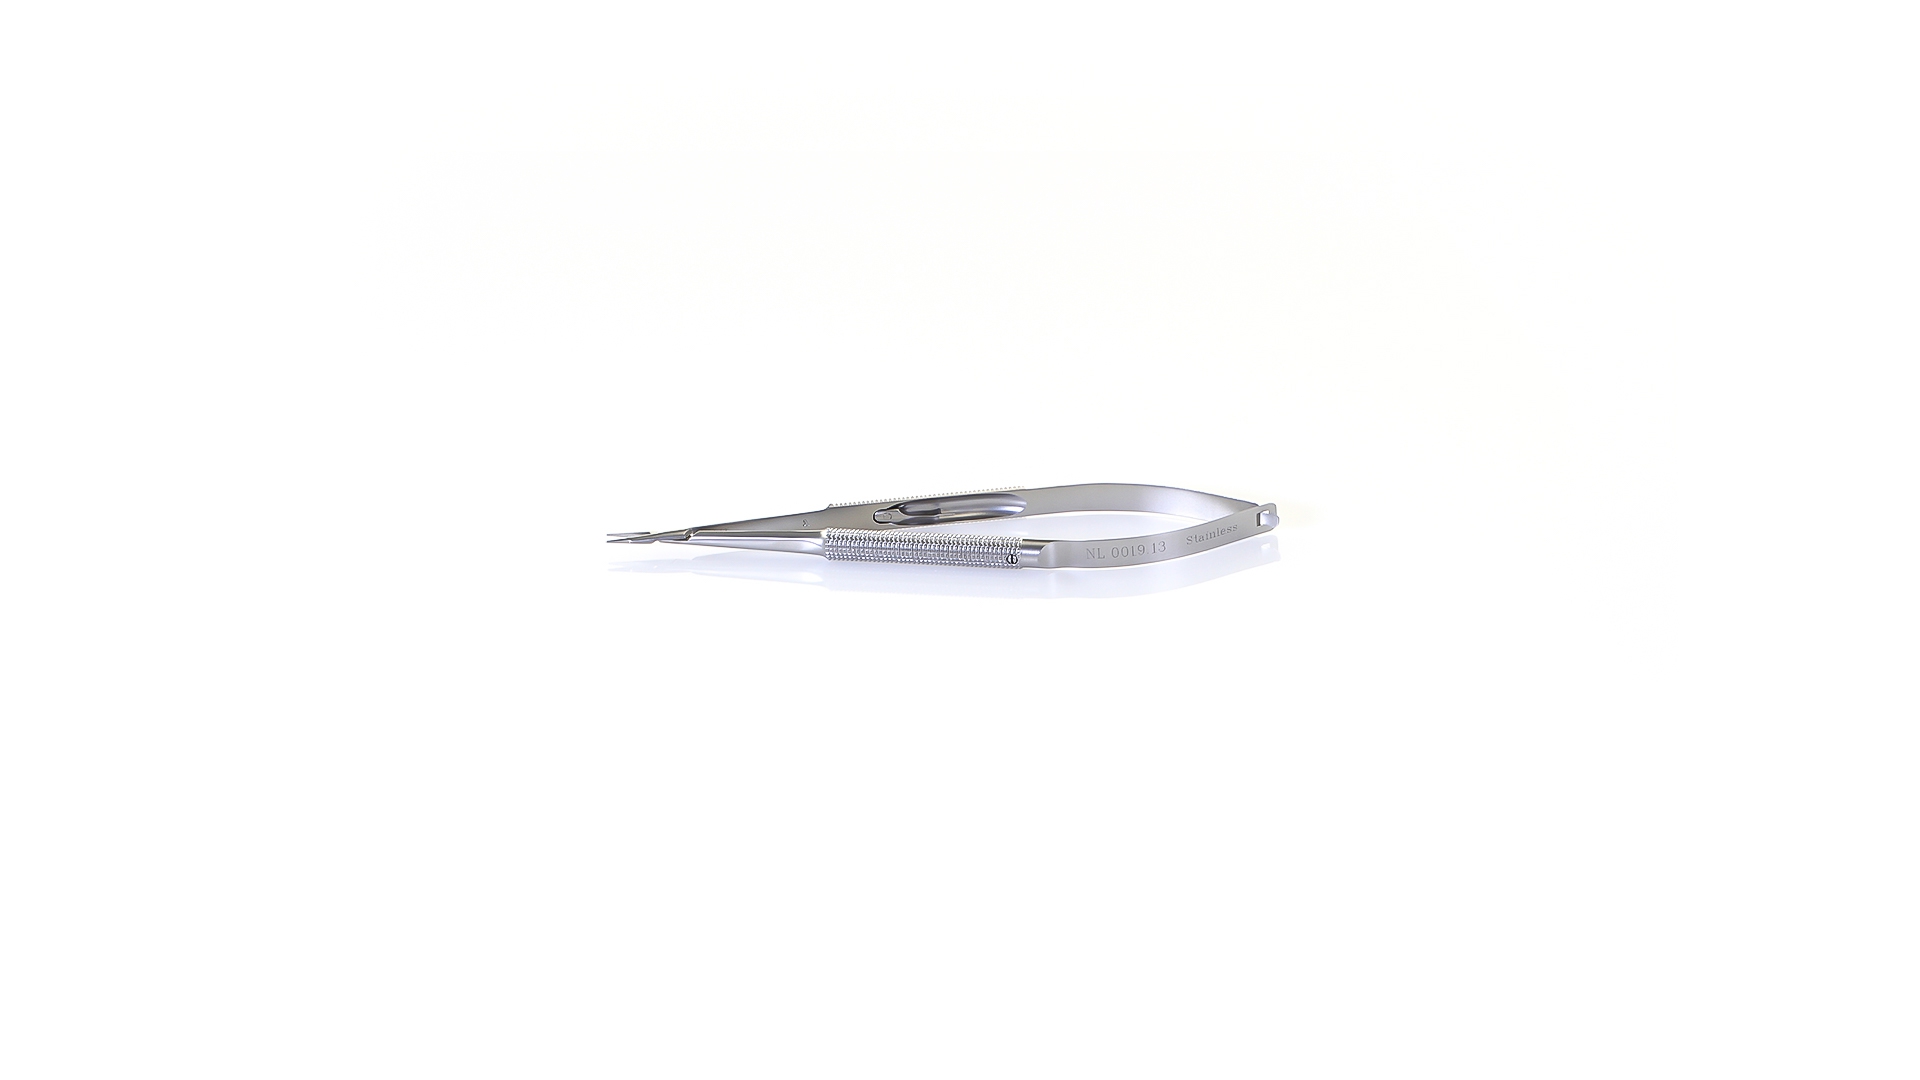 Barraquer Delicate Needle Holder - Straight TC coated jaws